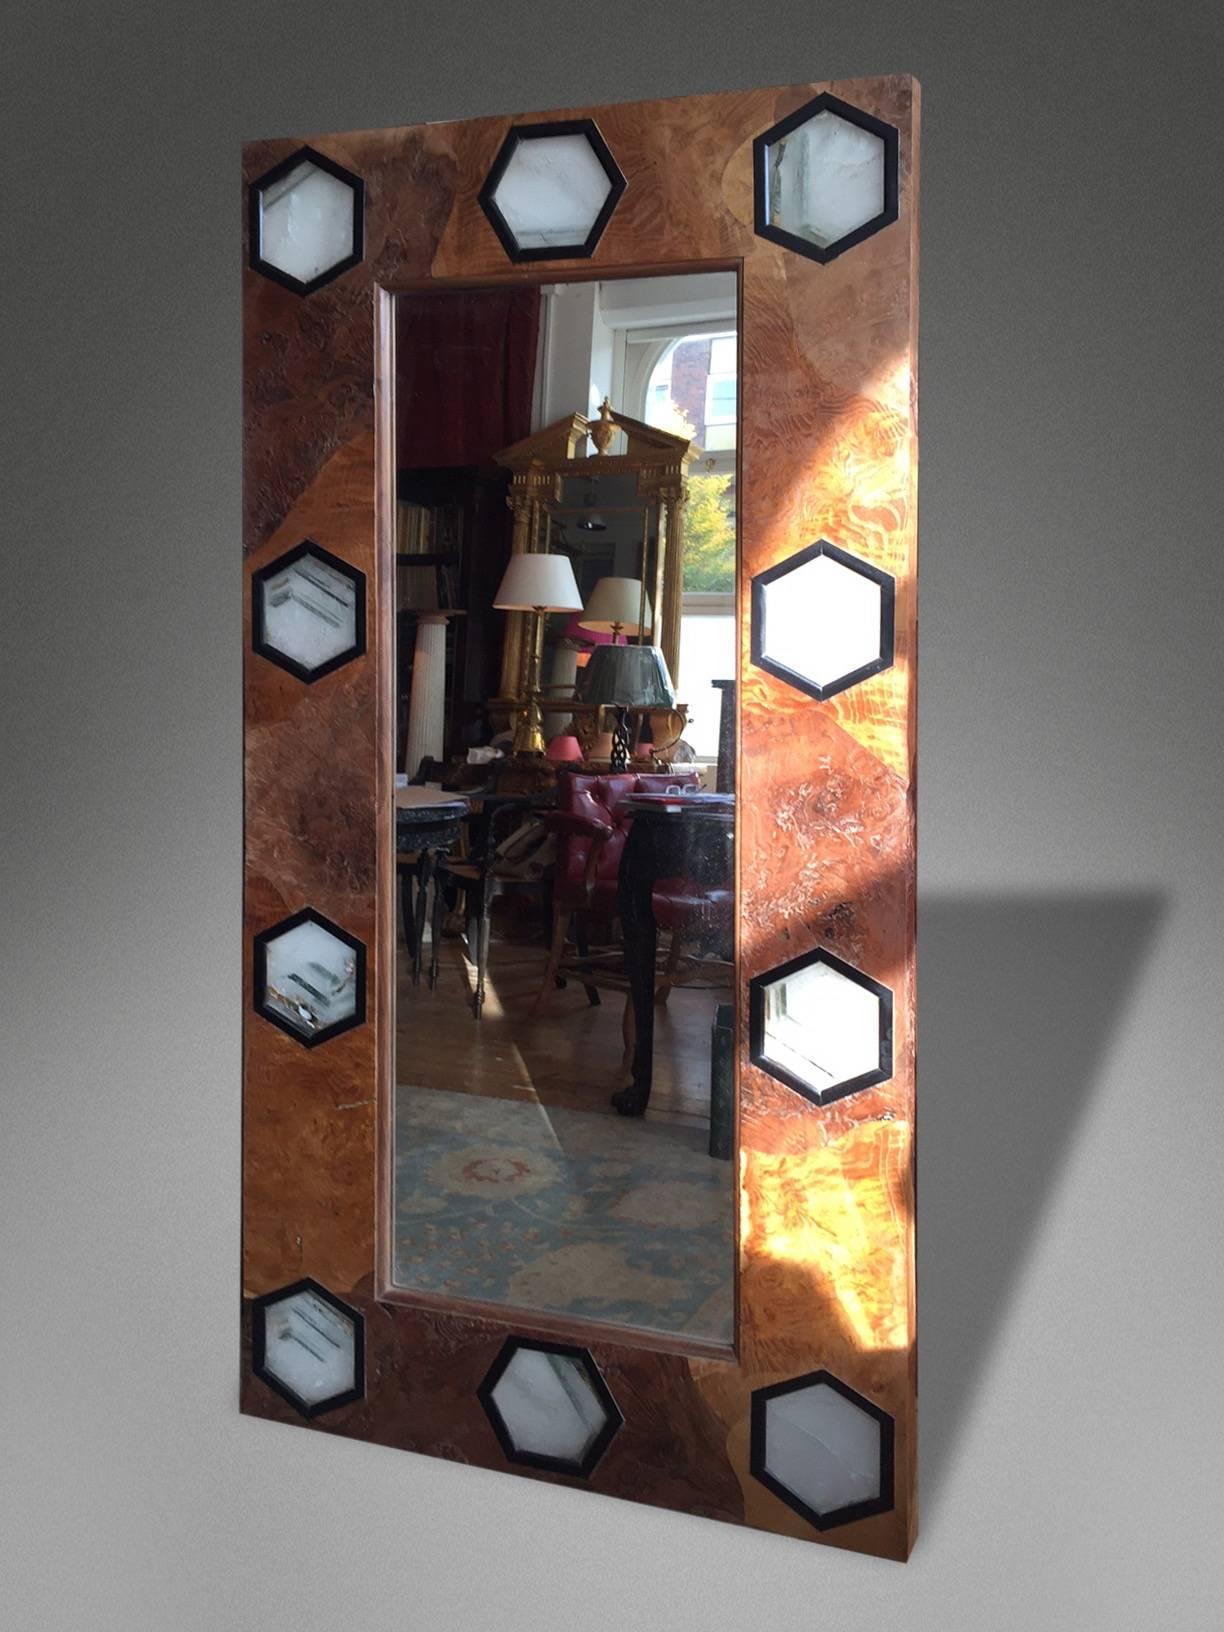 A 1930s style mirror with rare veneers and solid Quartz hexagonal plaques in ebonised frames.

The quartz is backlit with varied colored LED lighting.